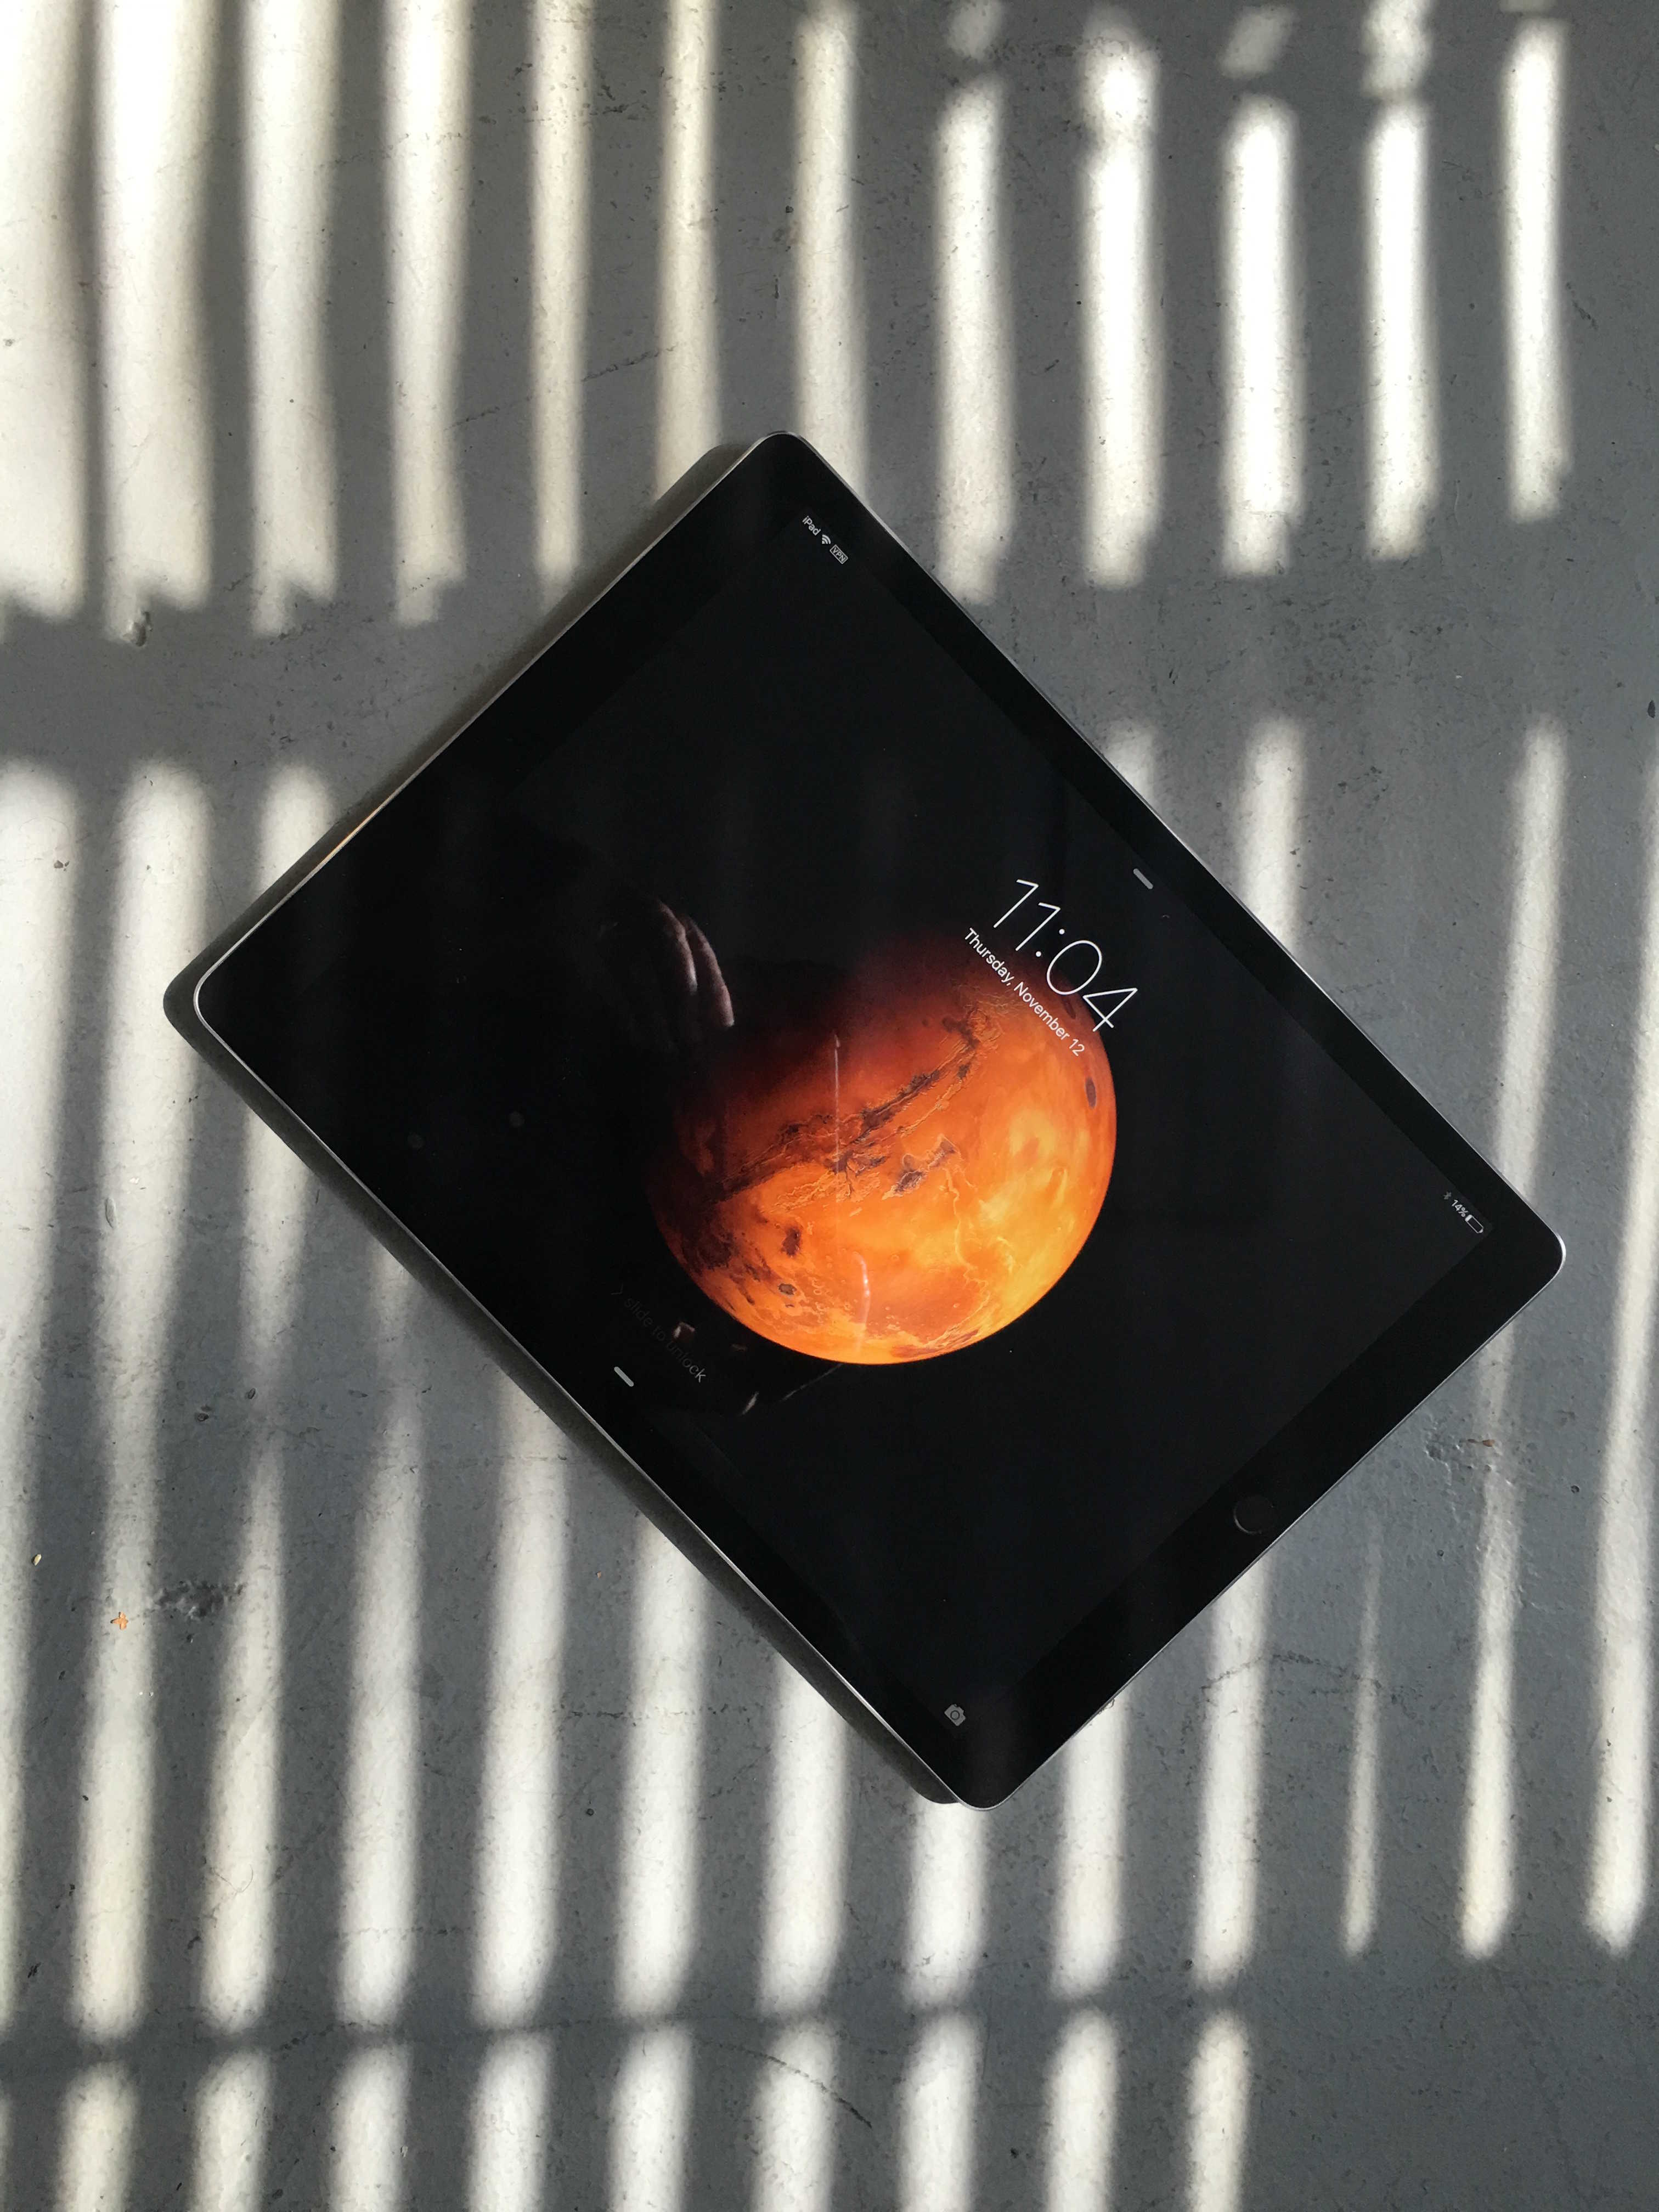 The next iPad Air could have the same speaker setup as the iPad Pro.